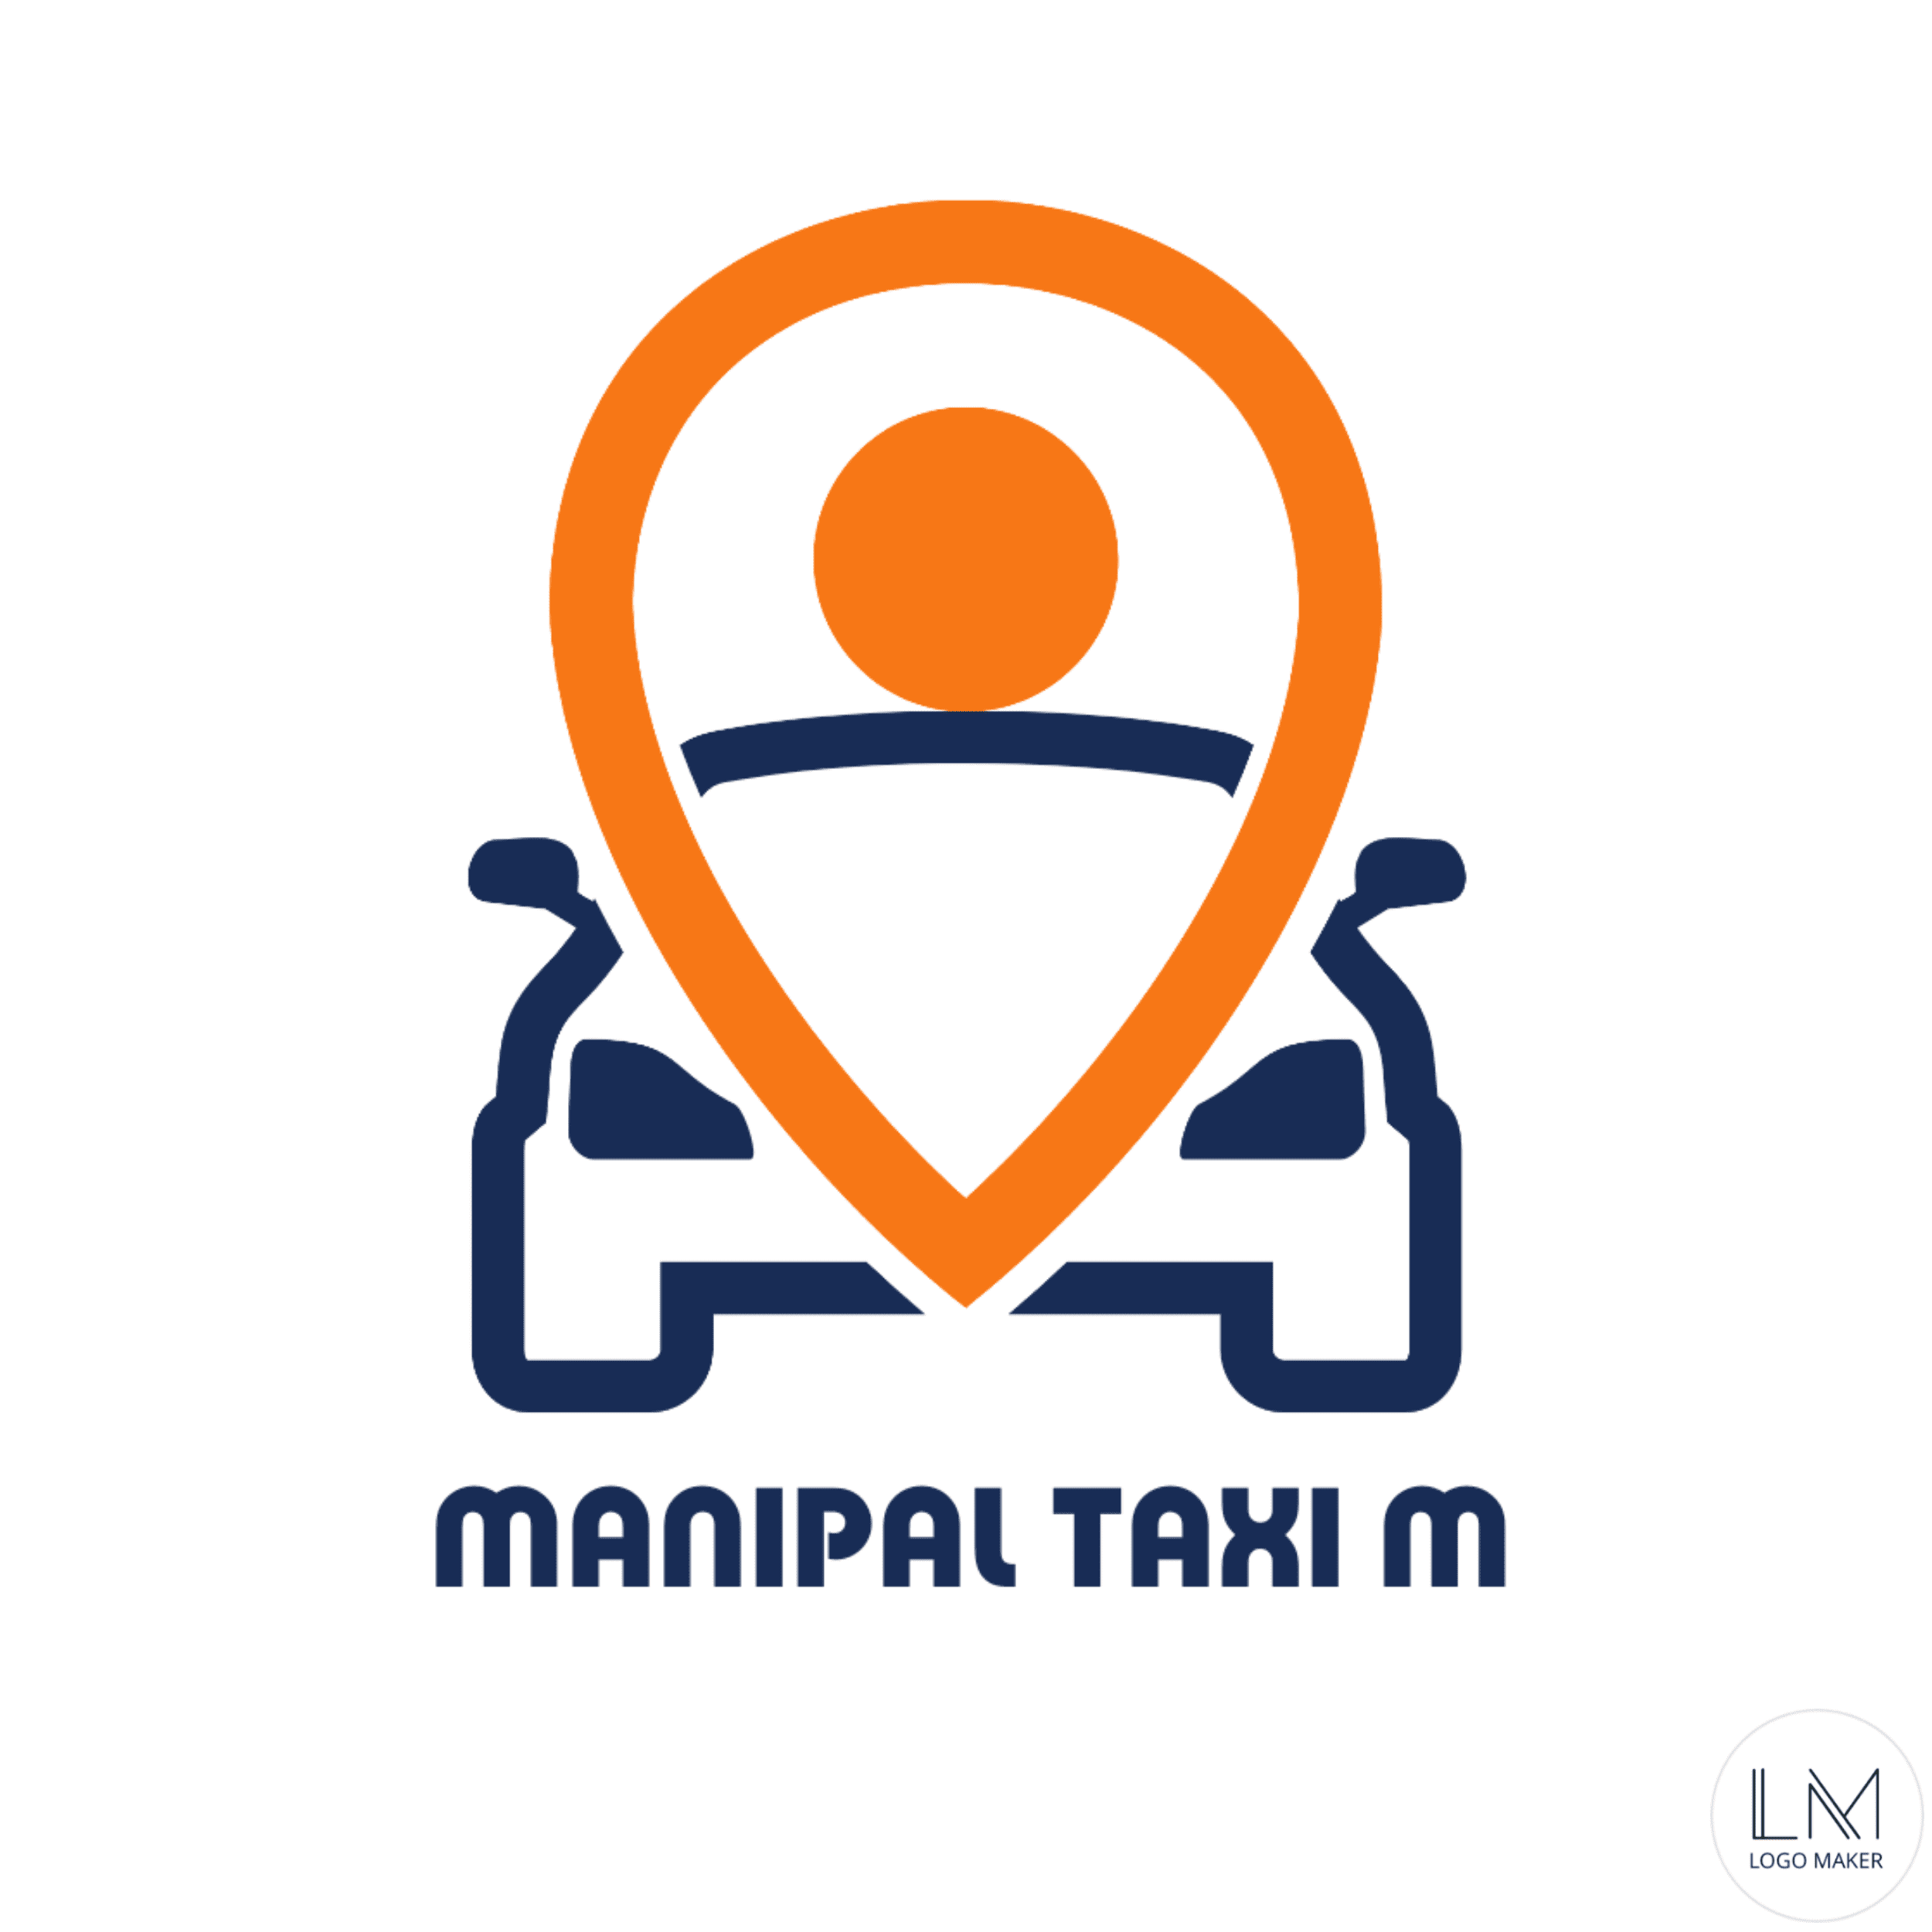 The Manipal Taxi